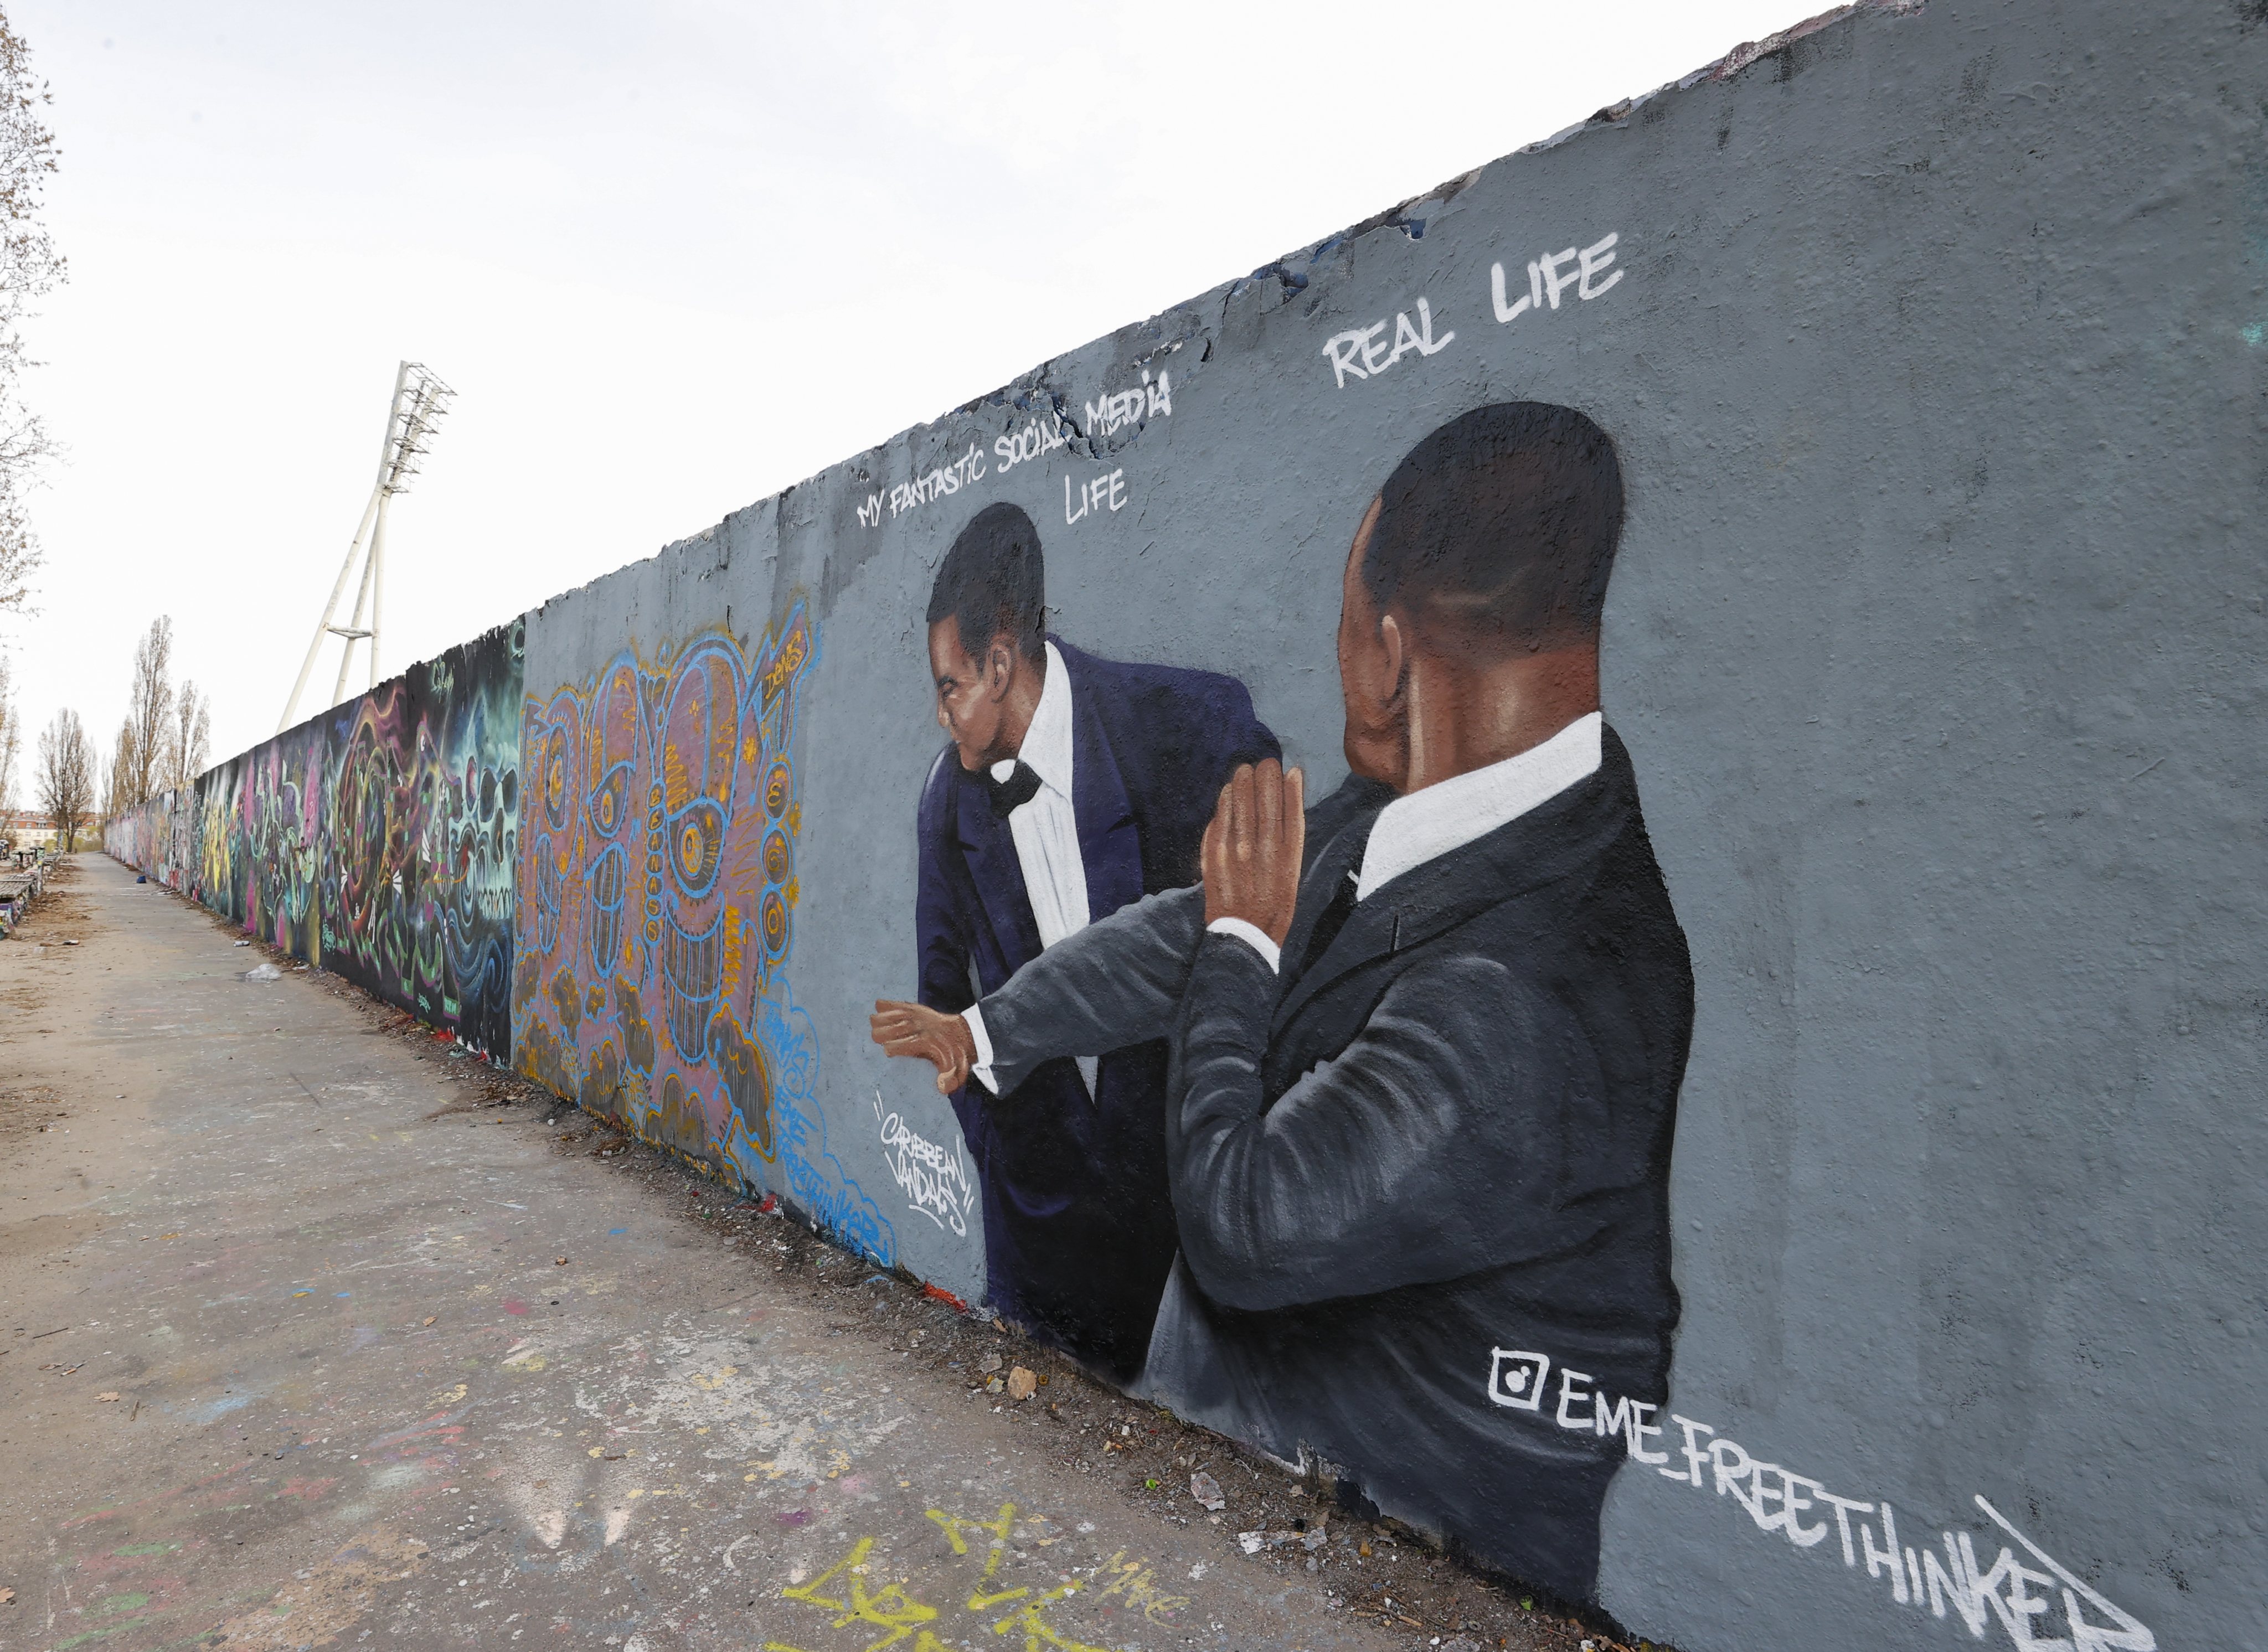 Will Smith graffiti on the streets of Germany&#039;s Berlin